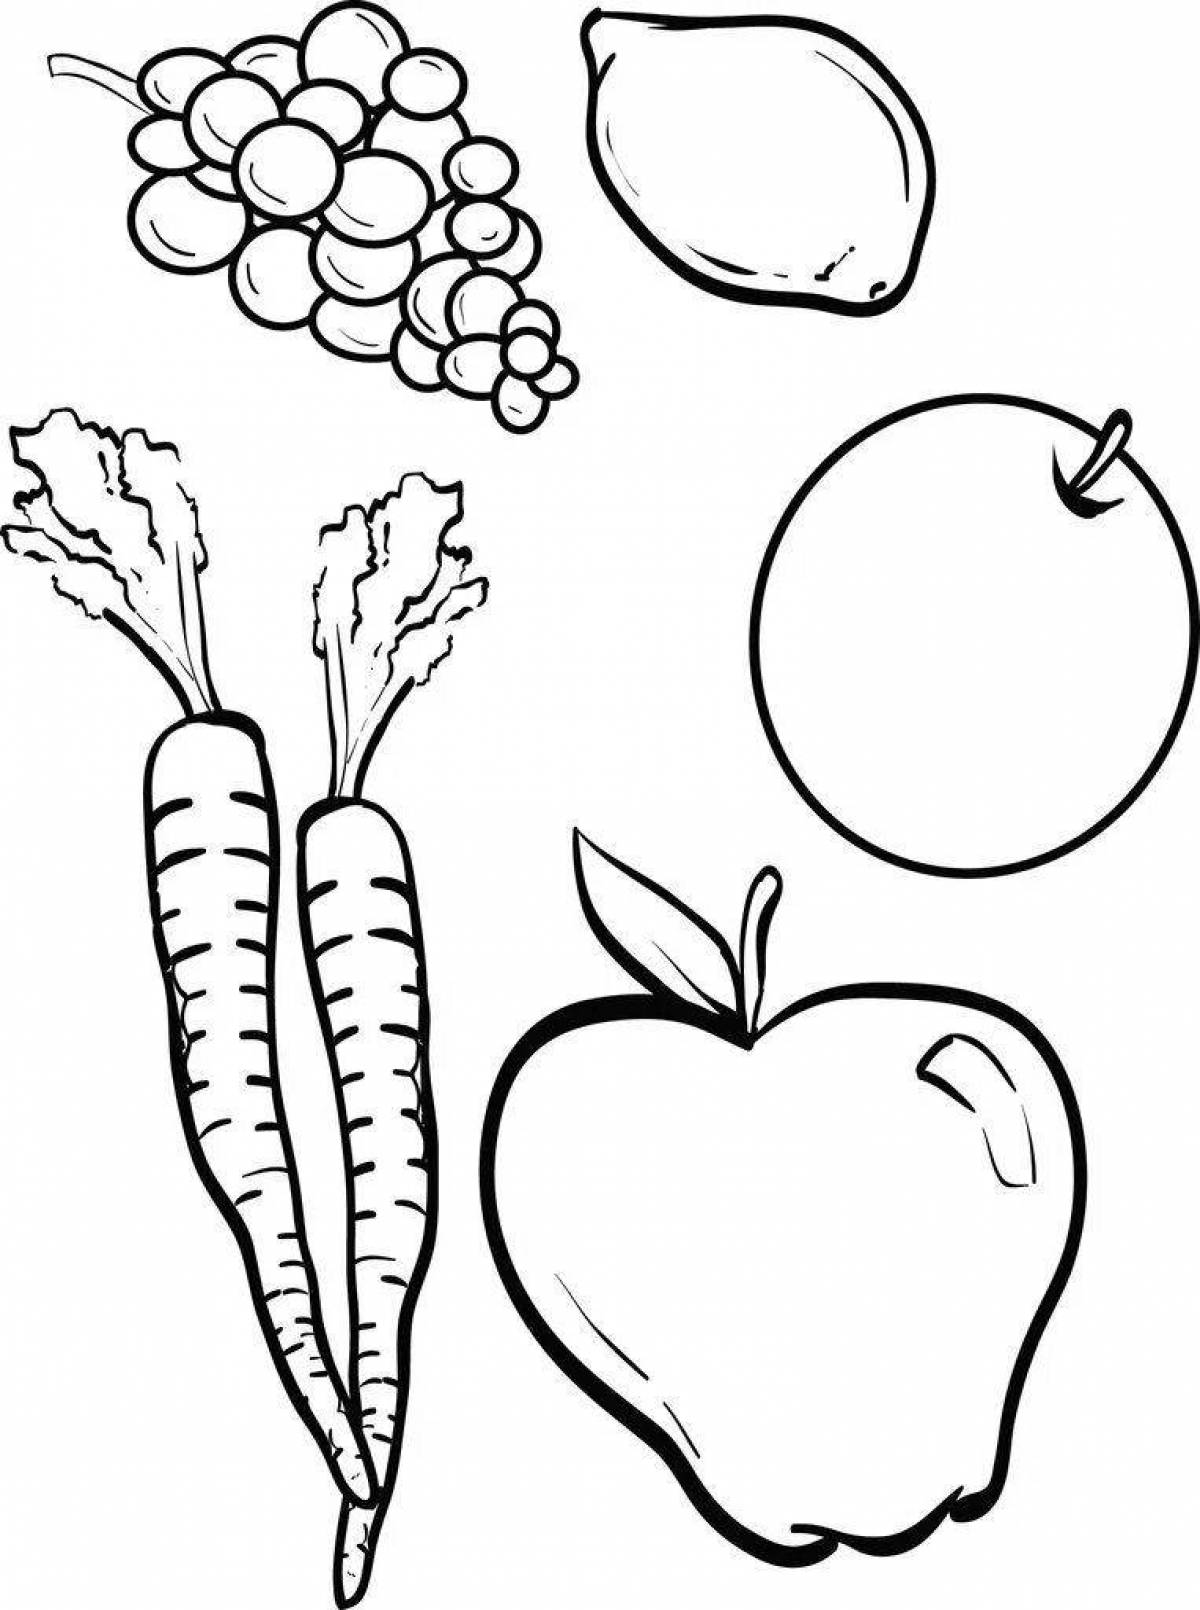 Colorful-crazy vegetable coloring book for kids